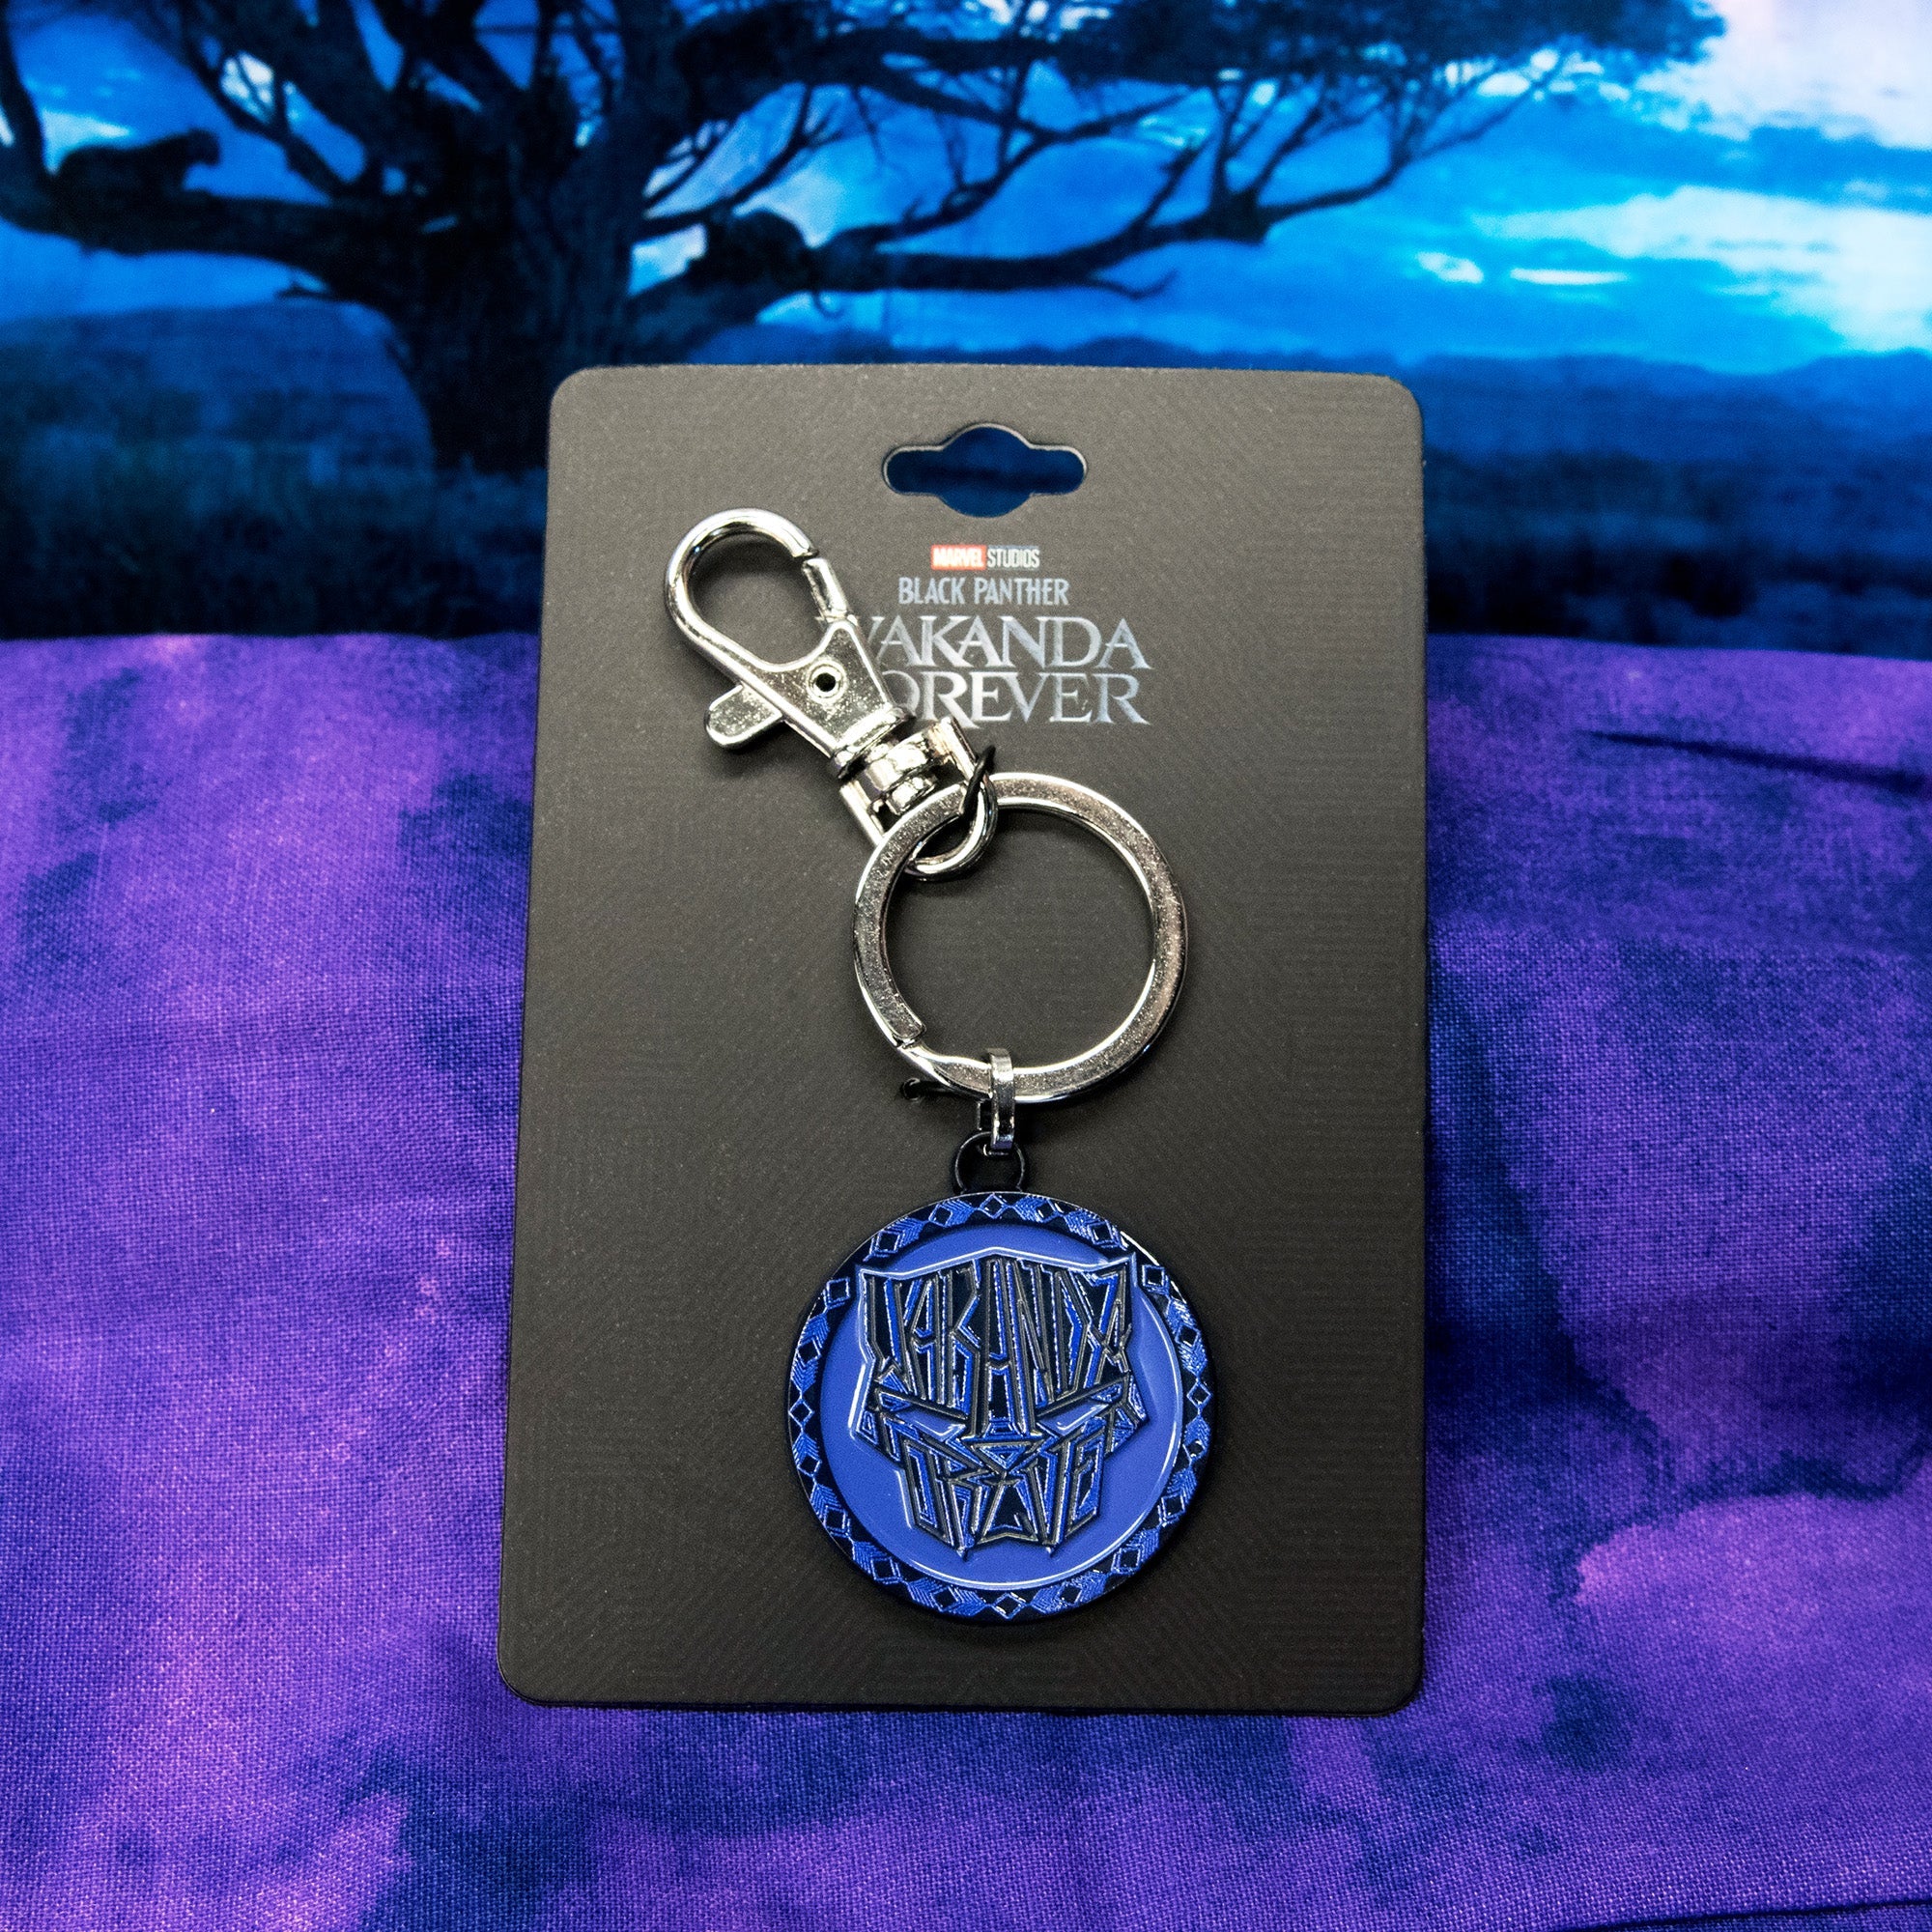 Black Panther: Wakanda Forever Panther Text Keychain